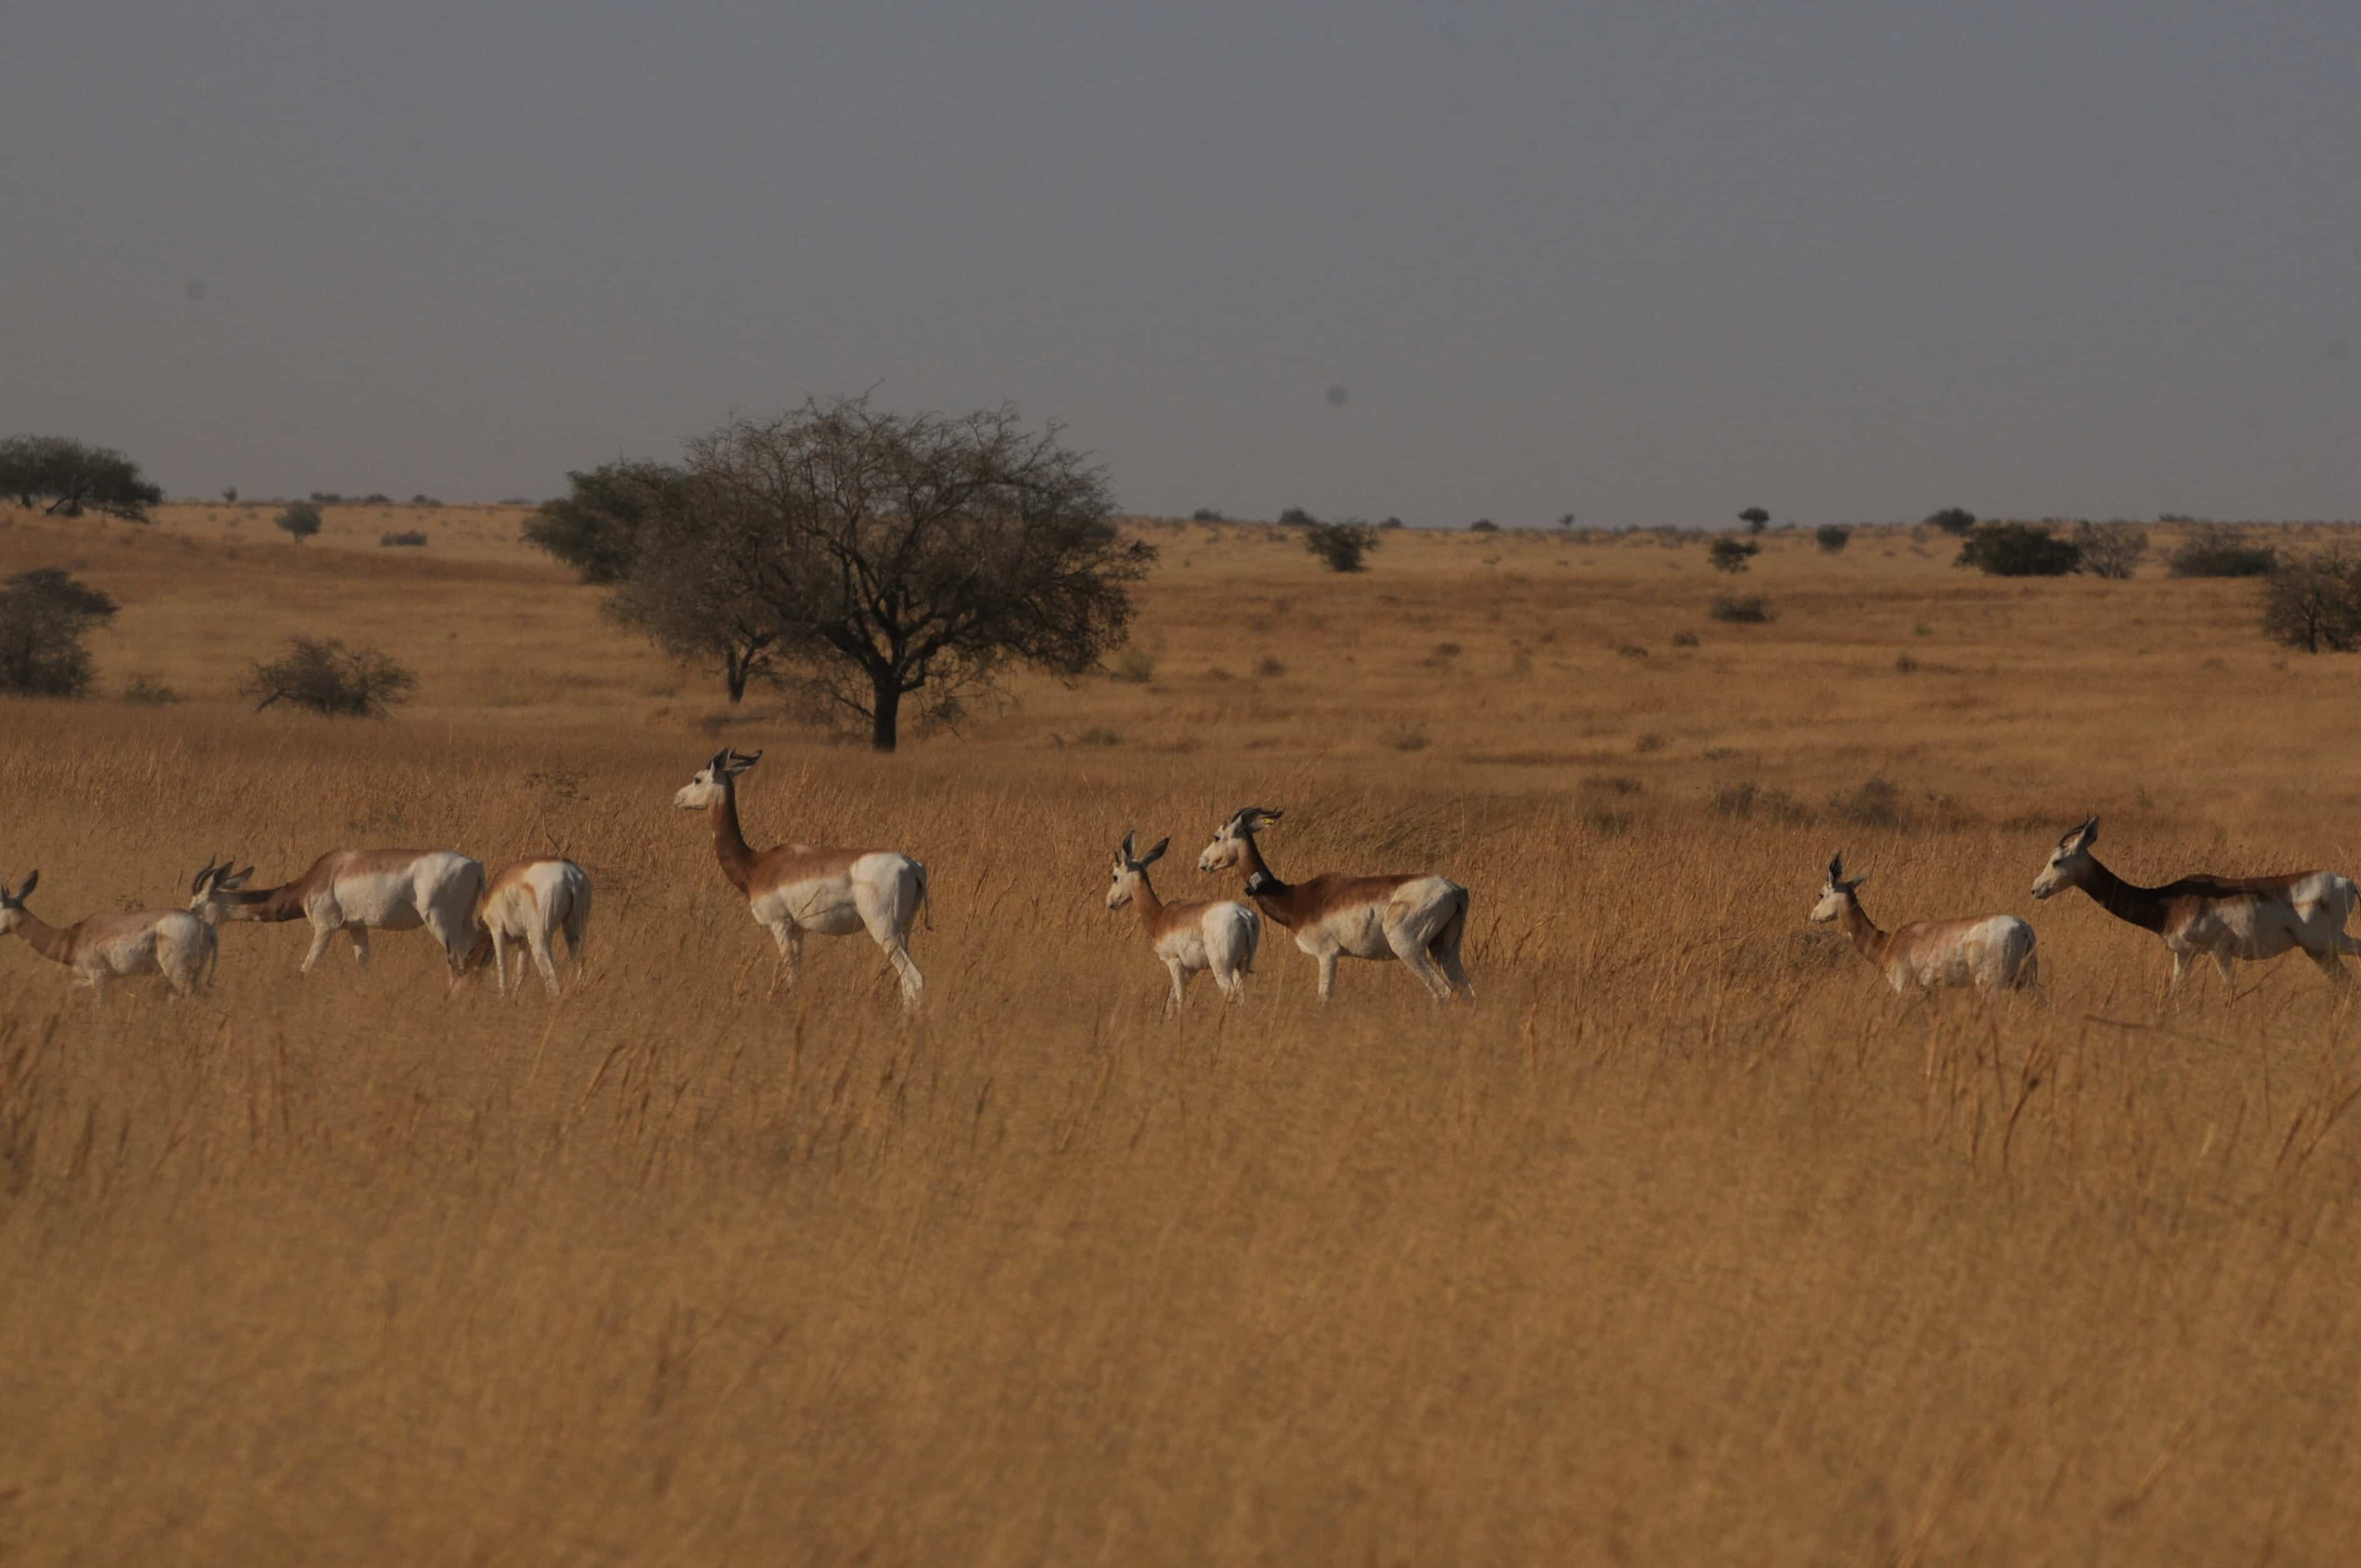 A collared dama gazelle joins a group of wild dama